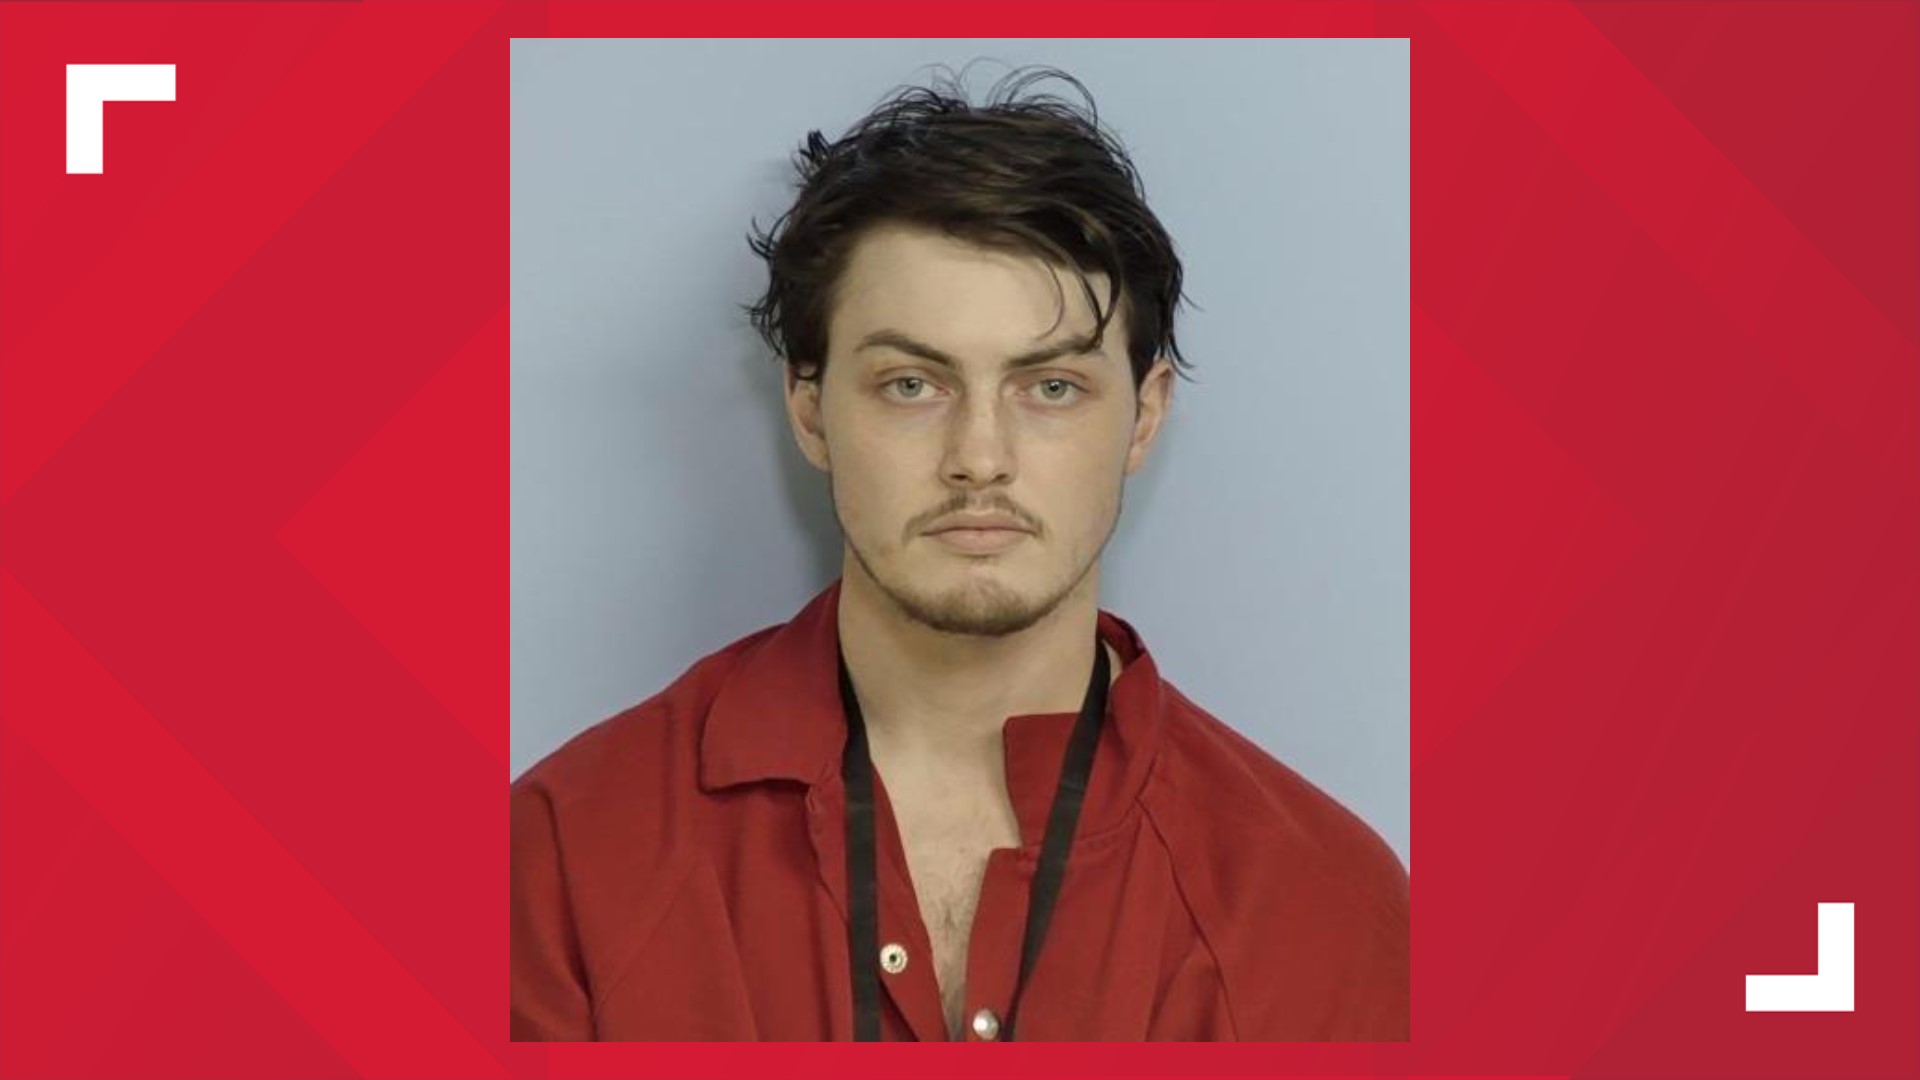 In a press release, the Walton County Sheriff's Office in Florida said that 21-year-old Gunner Cole had been arrested and charged with attempted murder.